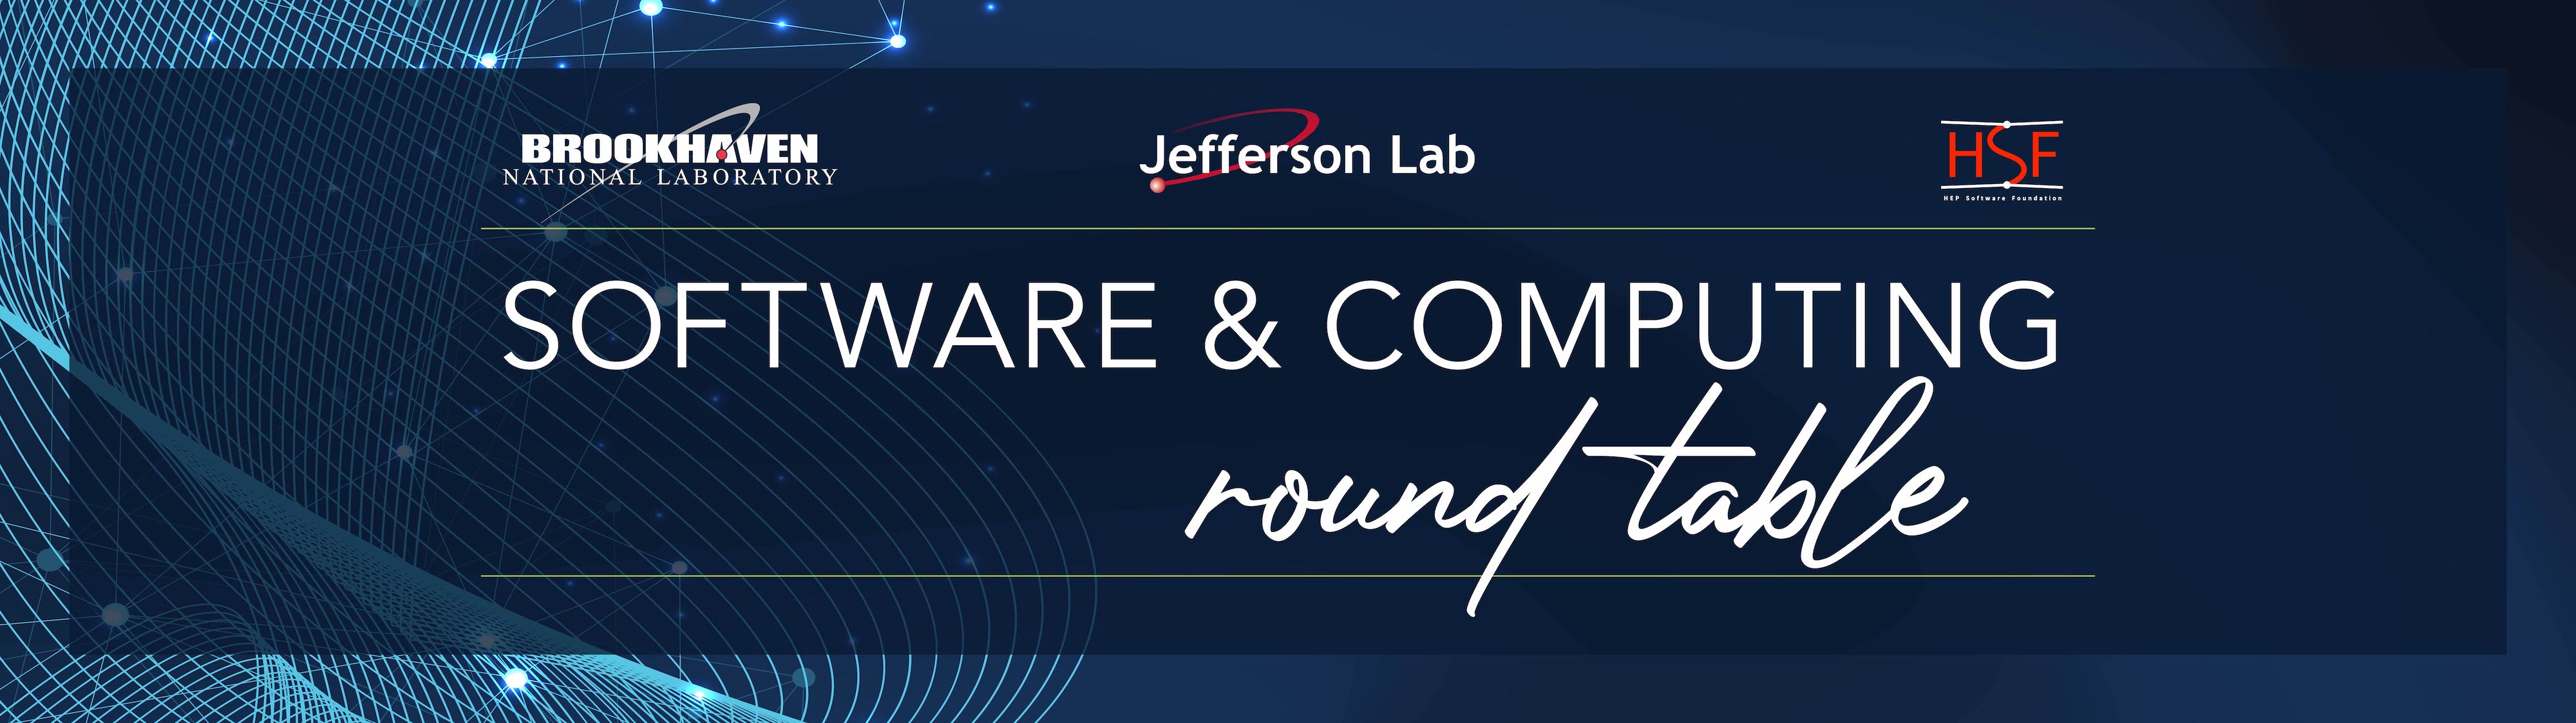 Banner showing the logos of the Software and Computing Round Table, BNL, HSF, and JLab